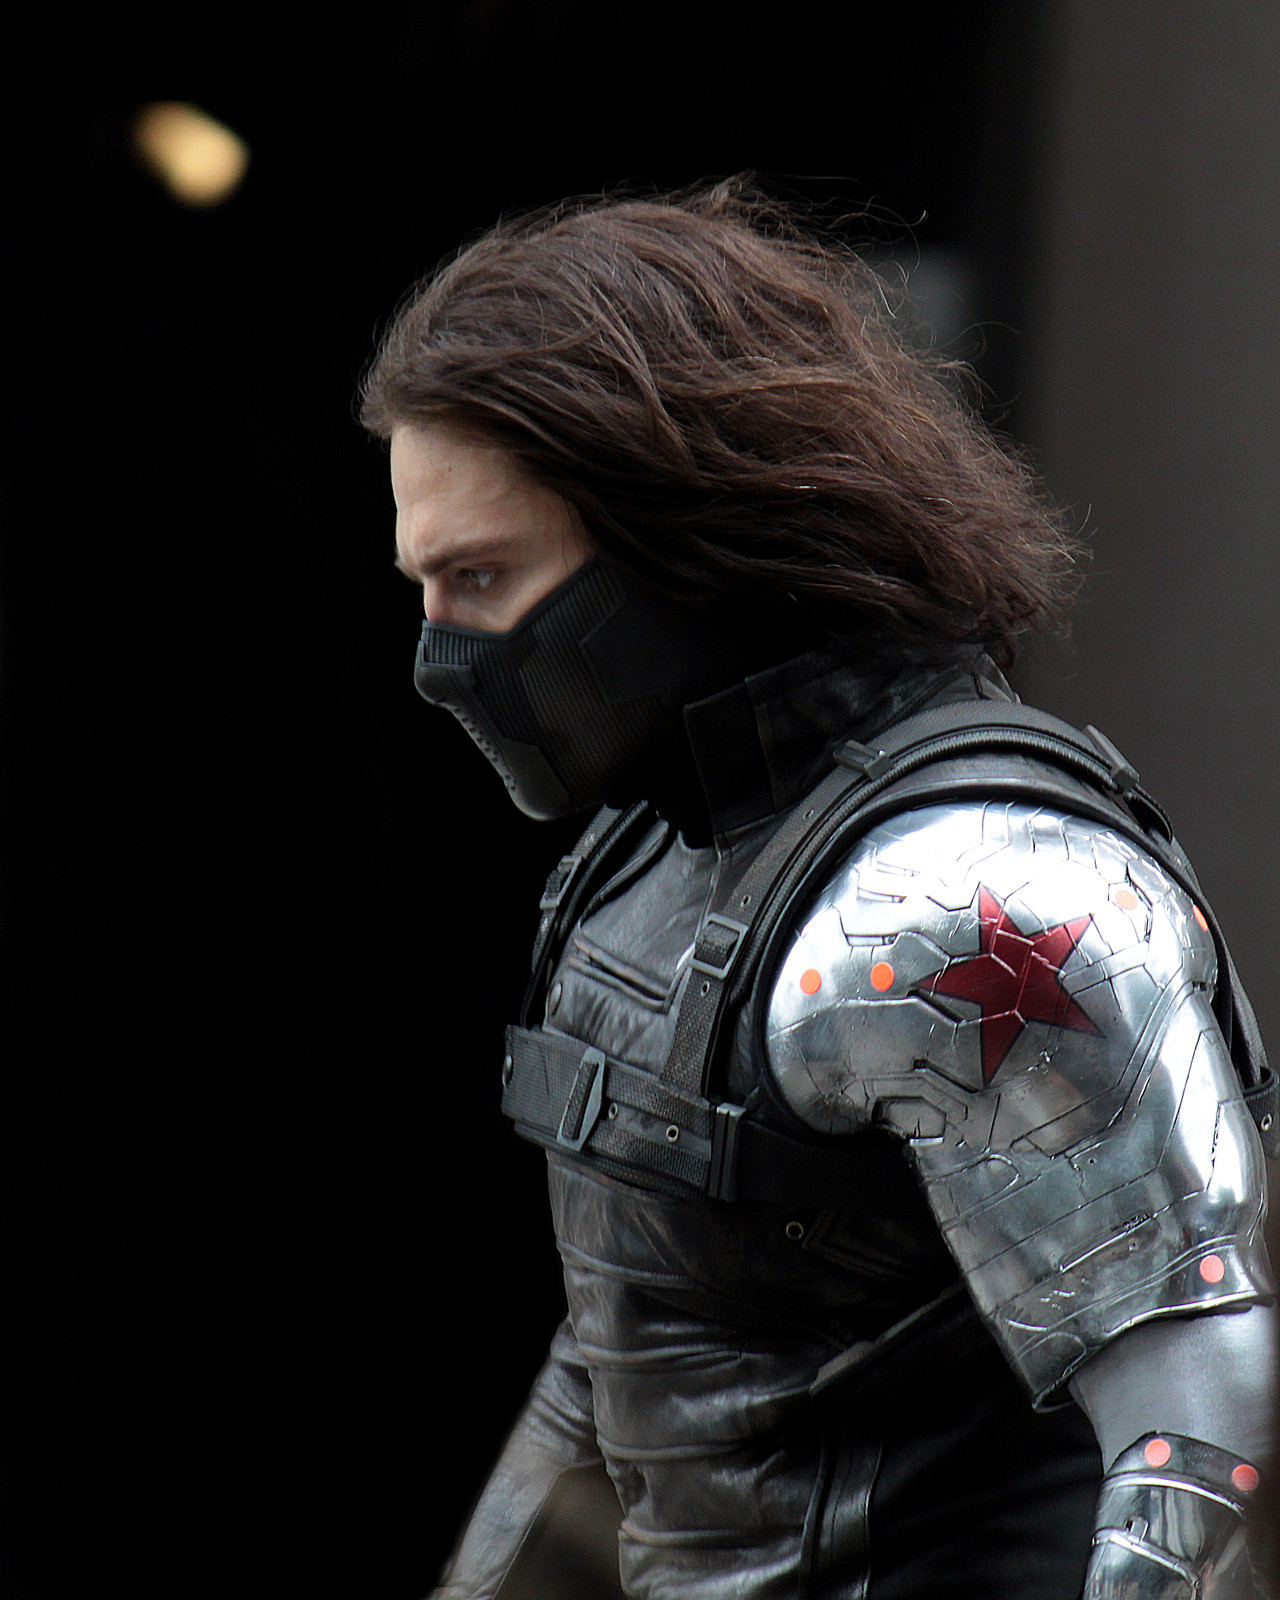 The Winter Soldier is not to be taken lightly. From blurppy.com